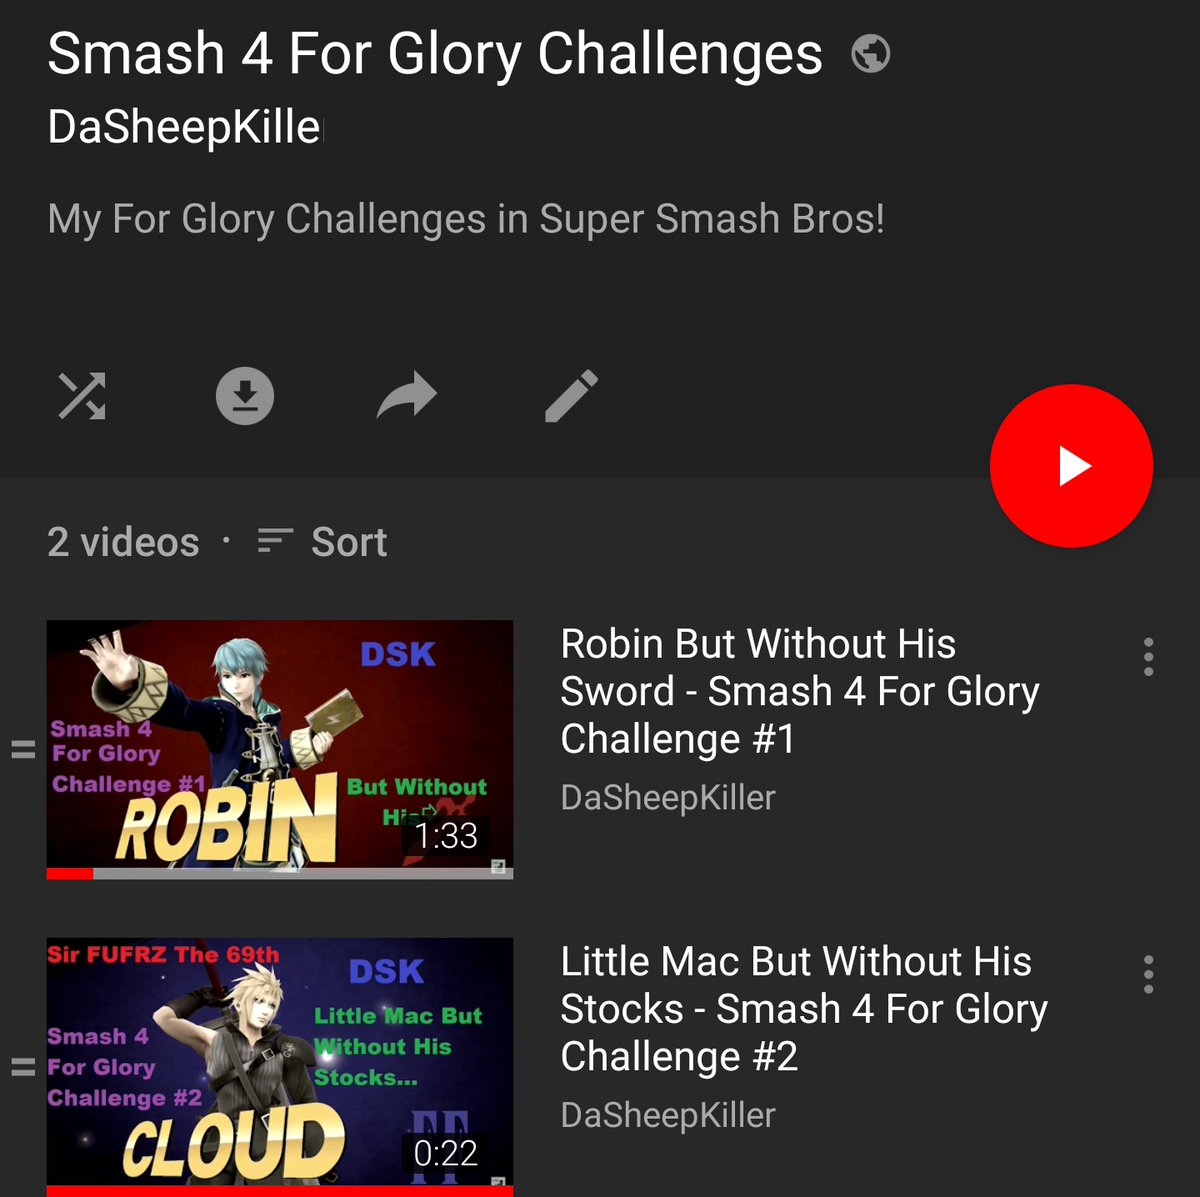 Smash 4 For Glory Challenges:I tried to do challenges on For Glory back in the Smash 4 days, but it didn't really go anywhere. I could bring this concept back with Ultimate if you guys are interested.